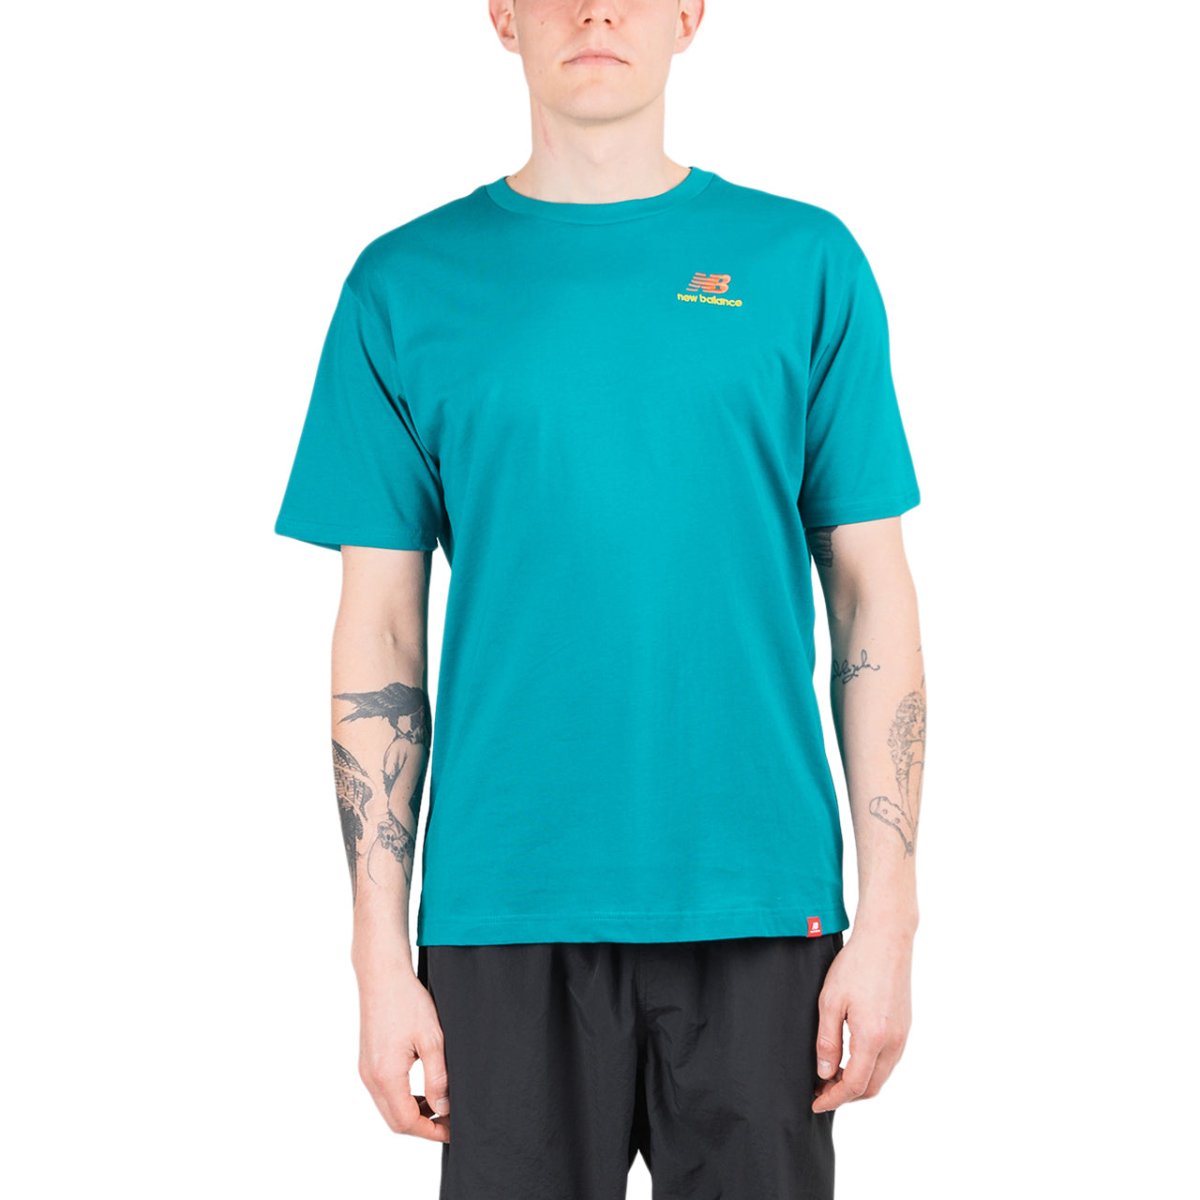 Image of New Balance Essentials Embroidered T-Shirt (Turquoise)